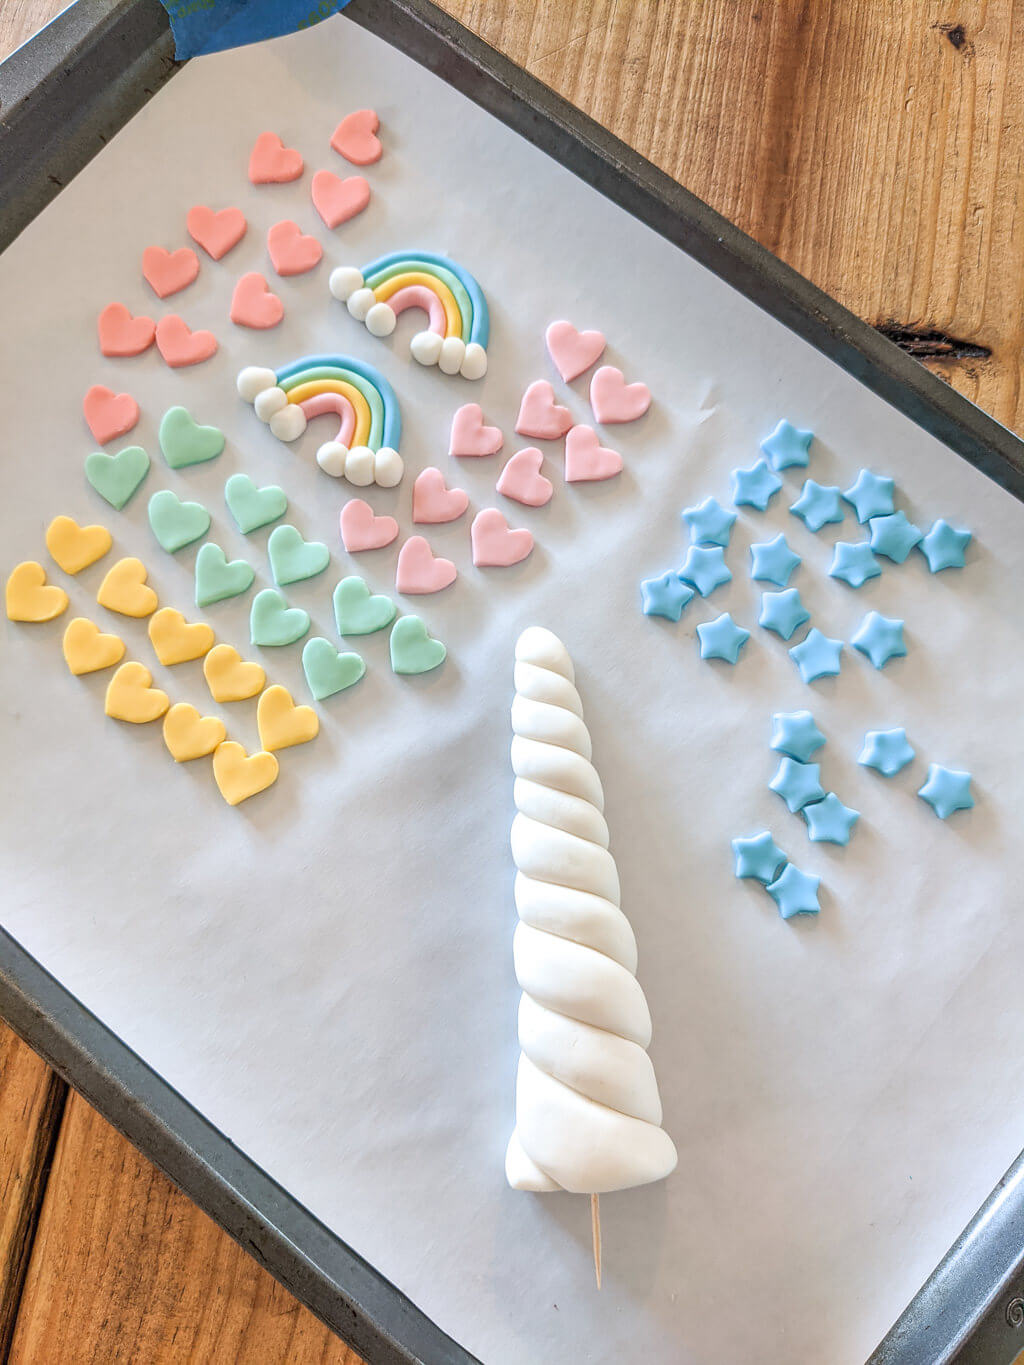 fondant stars, rainbows, and unicorn horn cake toppers for a unicorn birthday cake